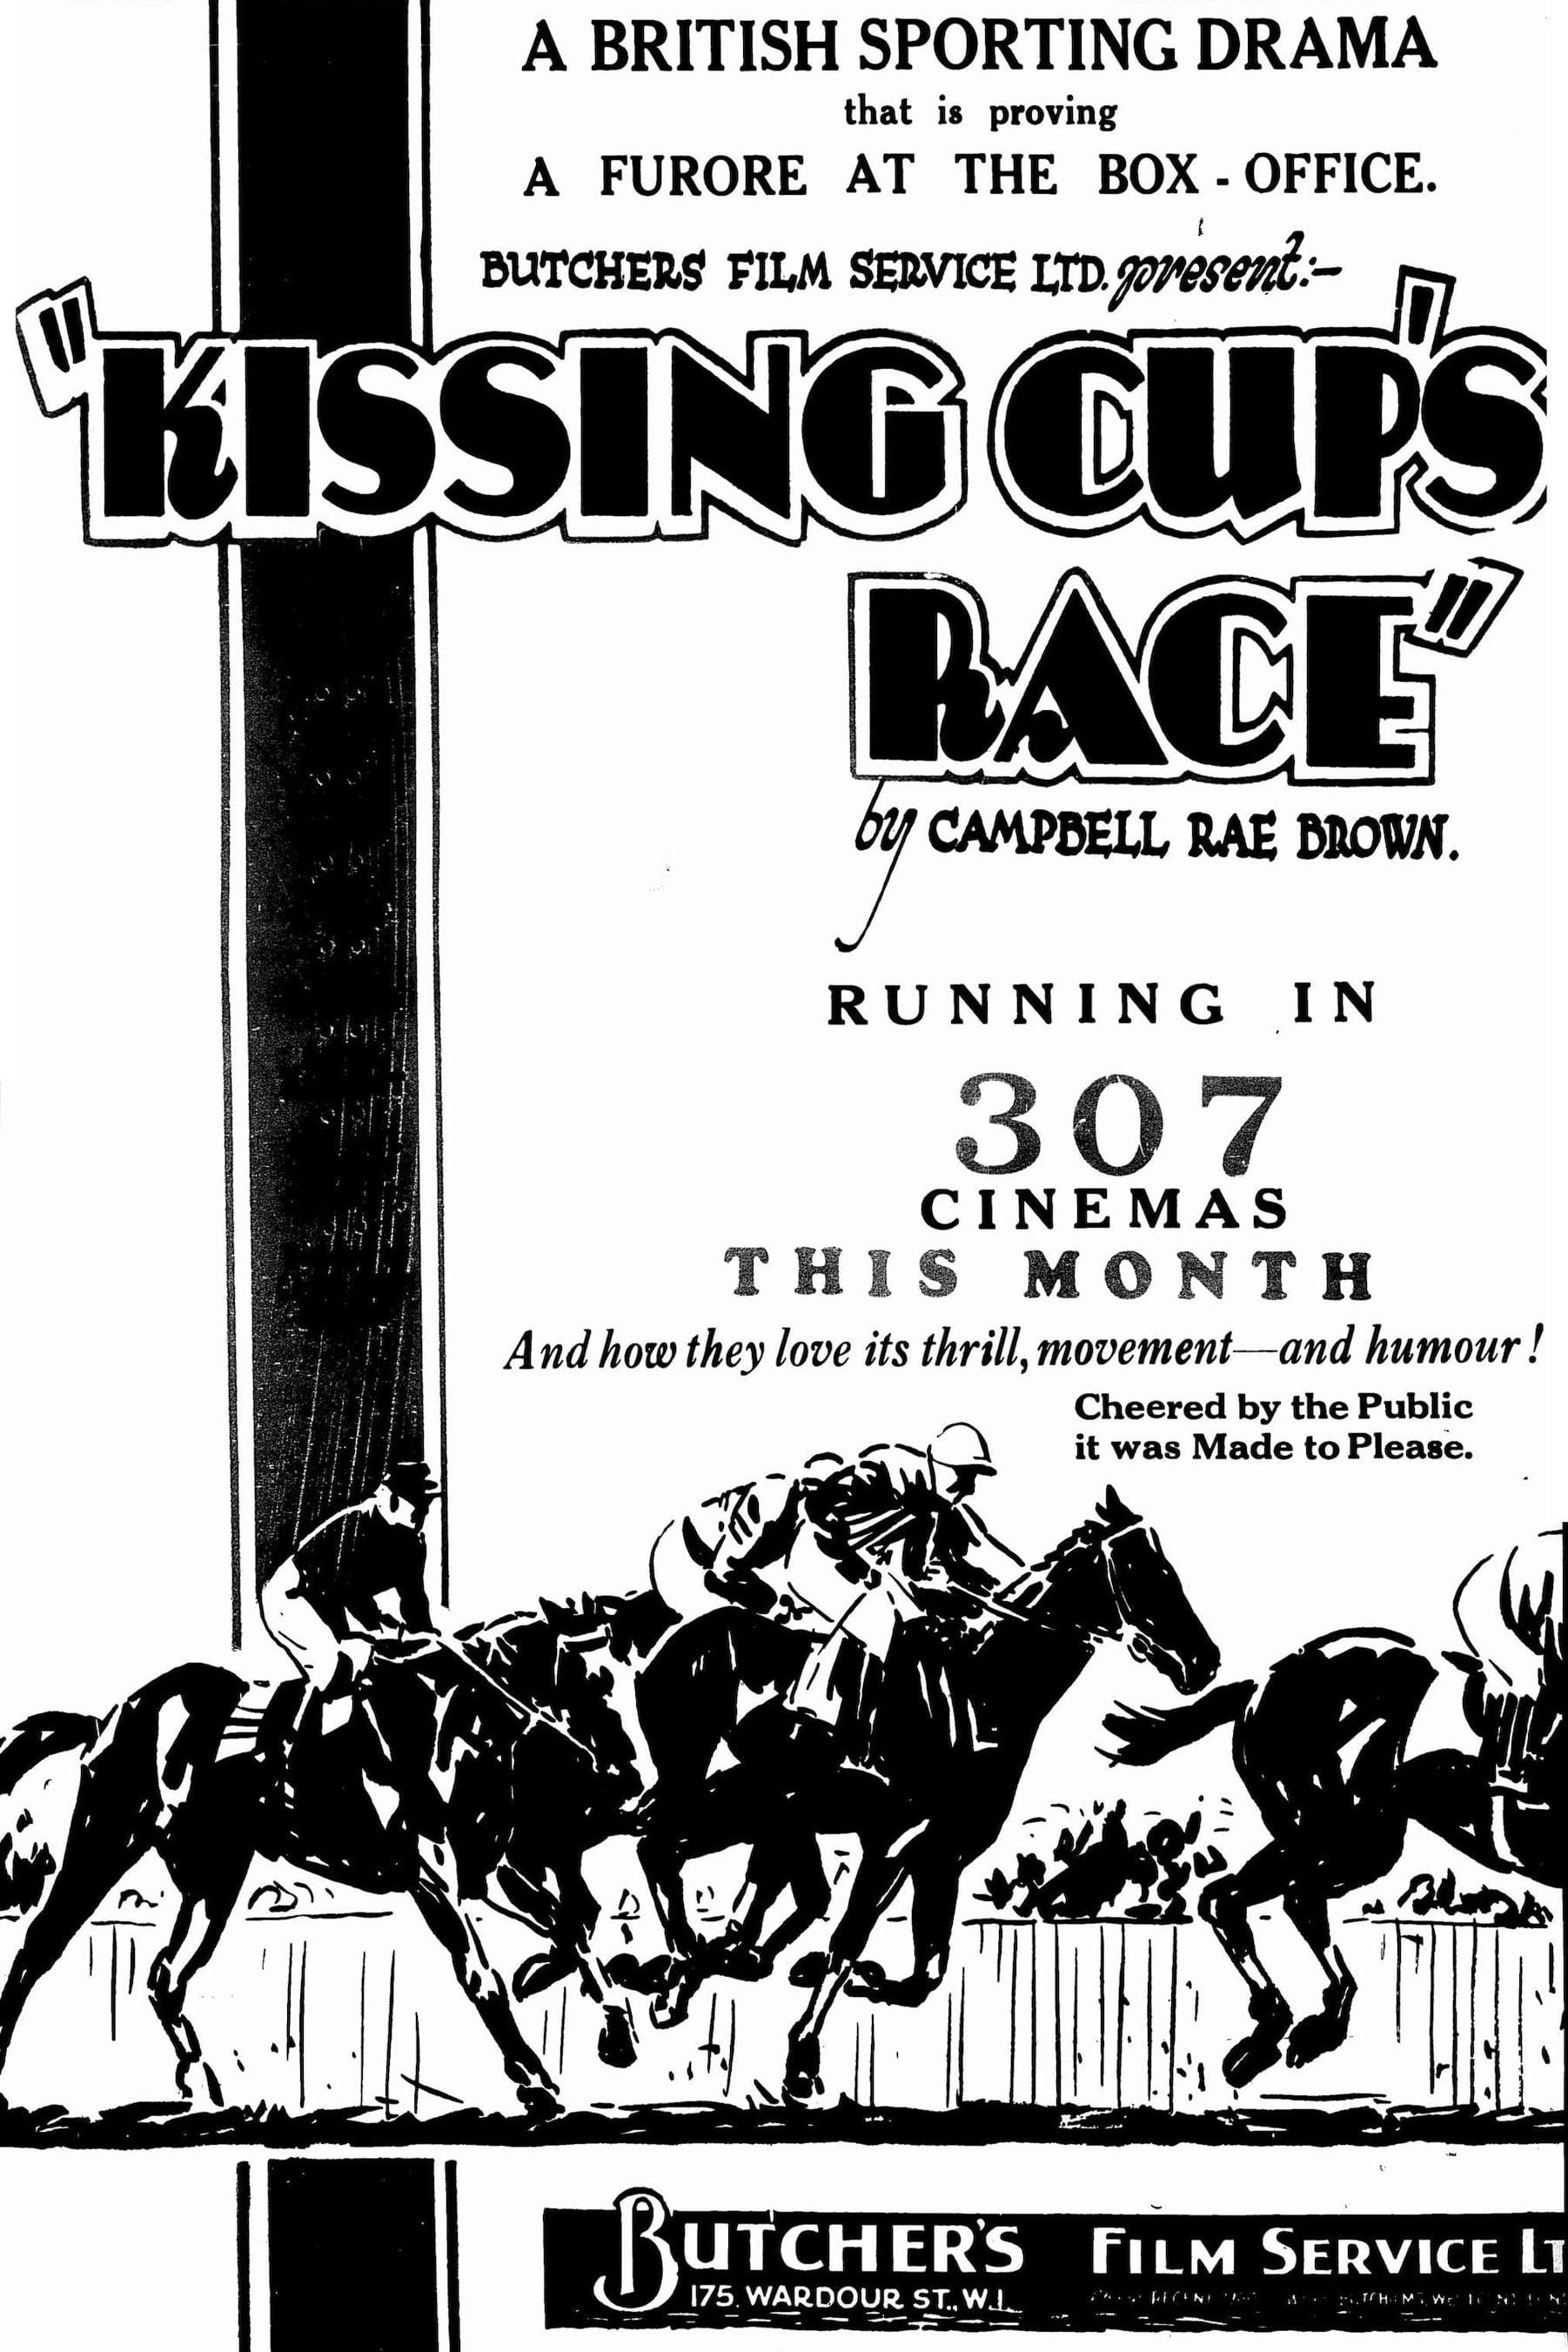 Kissing Cup's Race